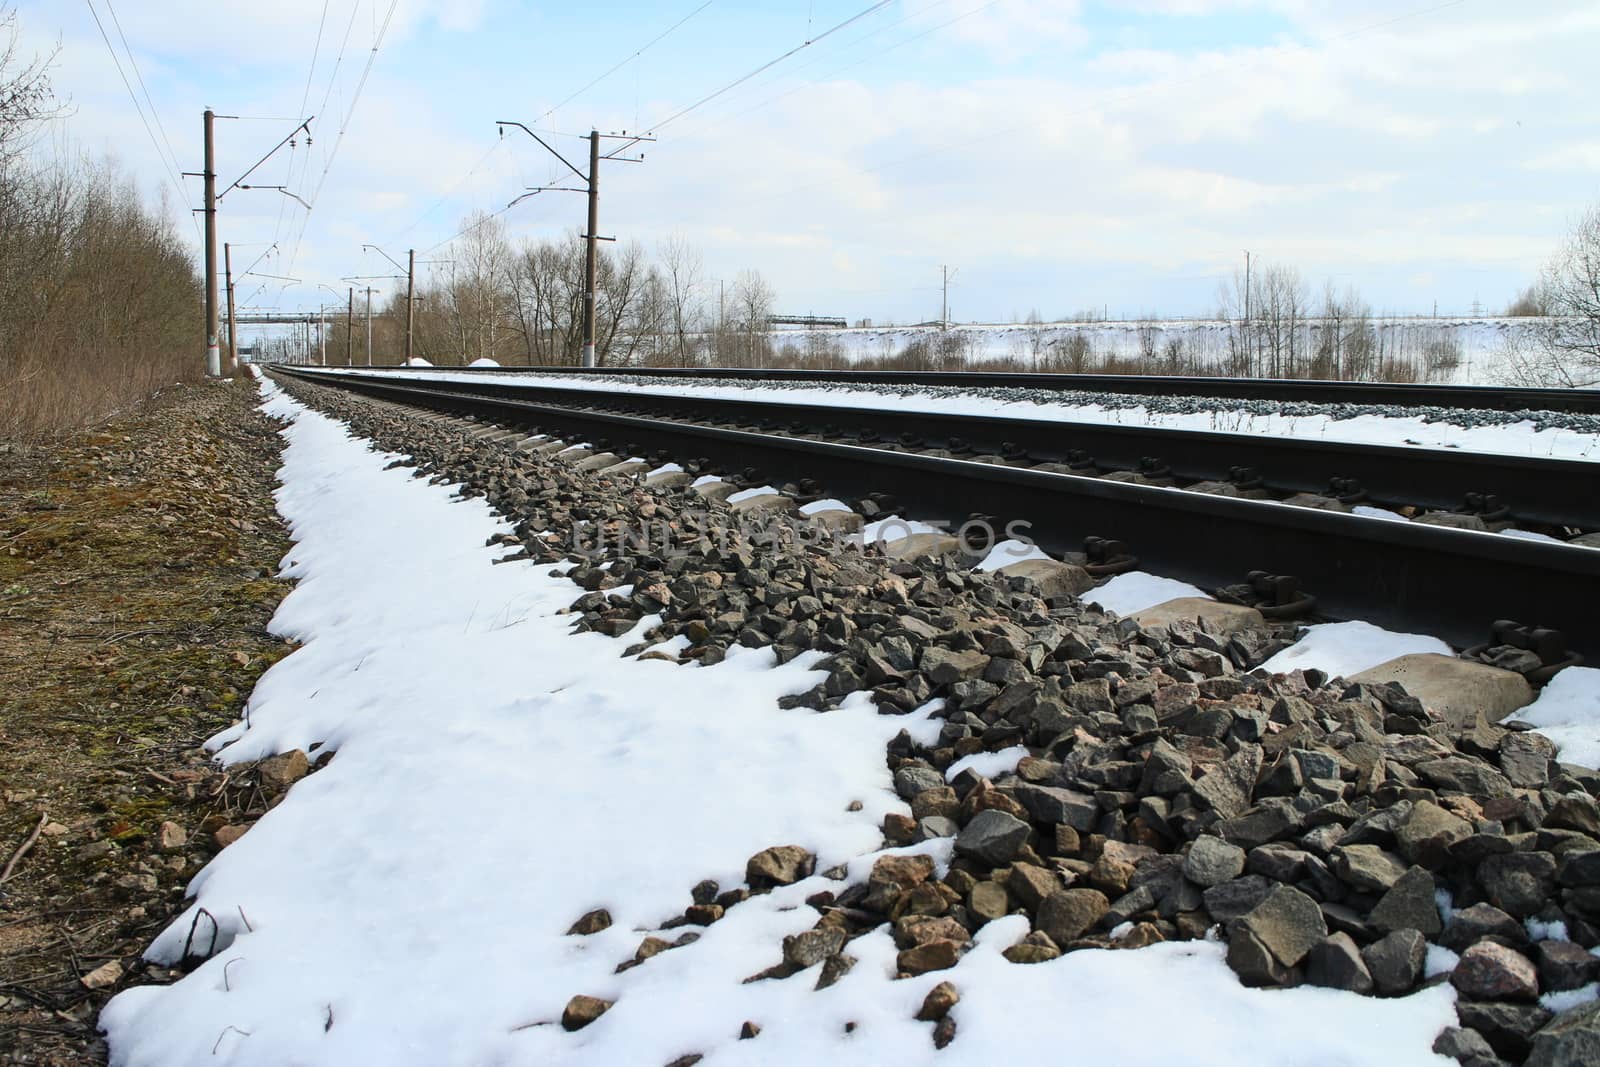 rails of railway forward go into distance at winter